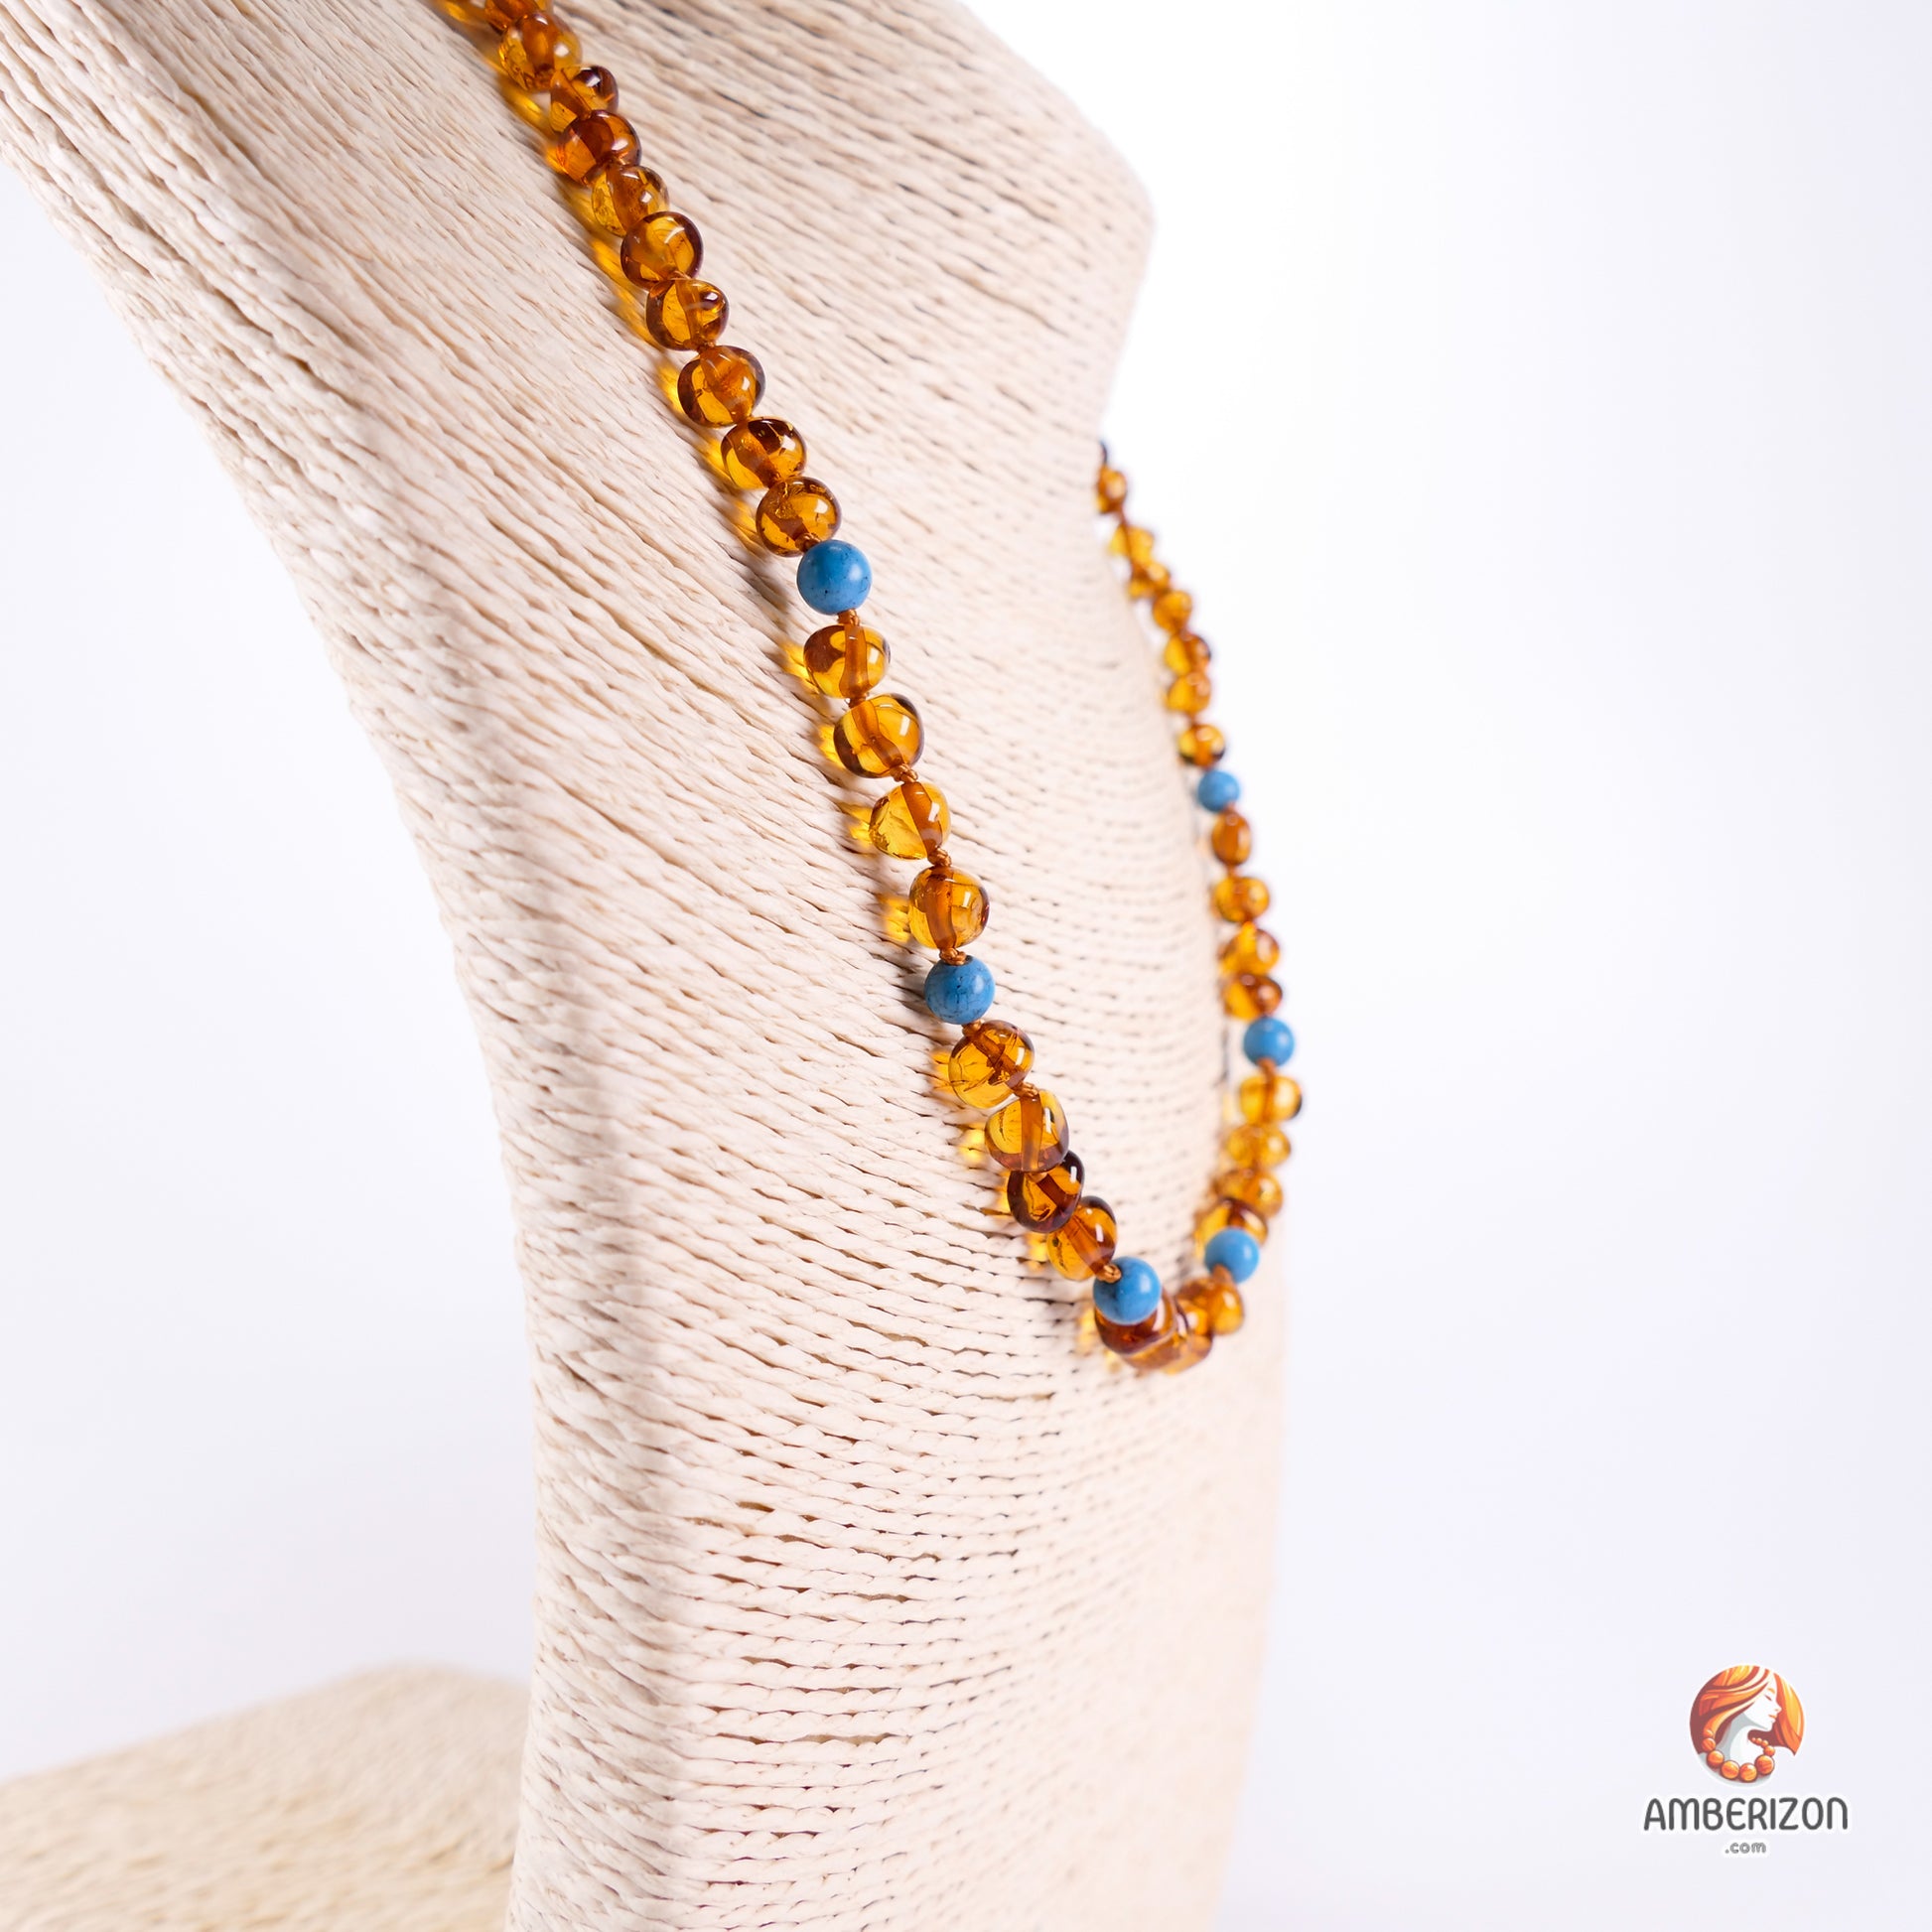 Handcrafted Adult Baltic Amber Necklace - Contemporary Design - 49cm Length